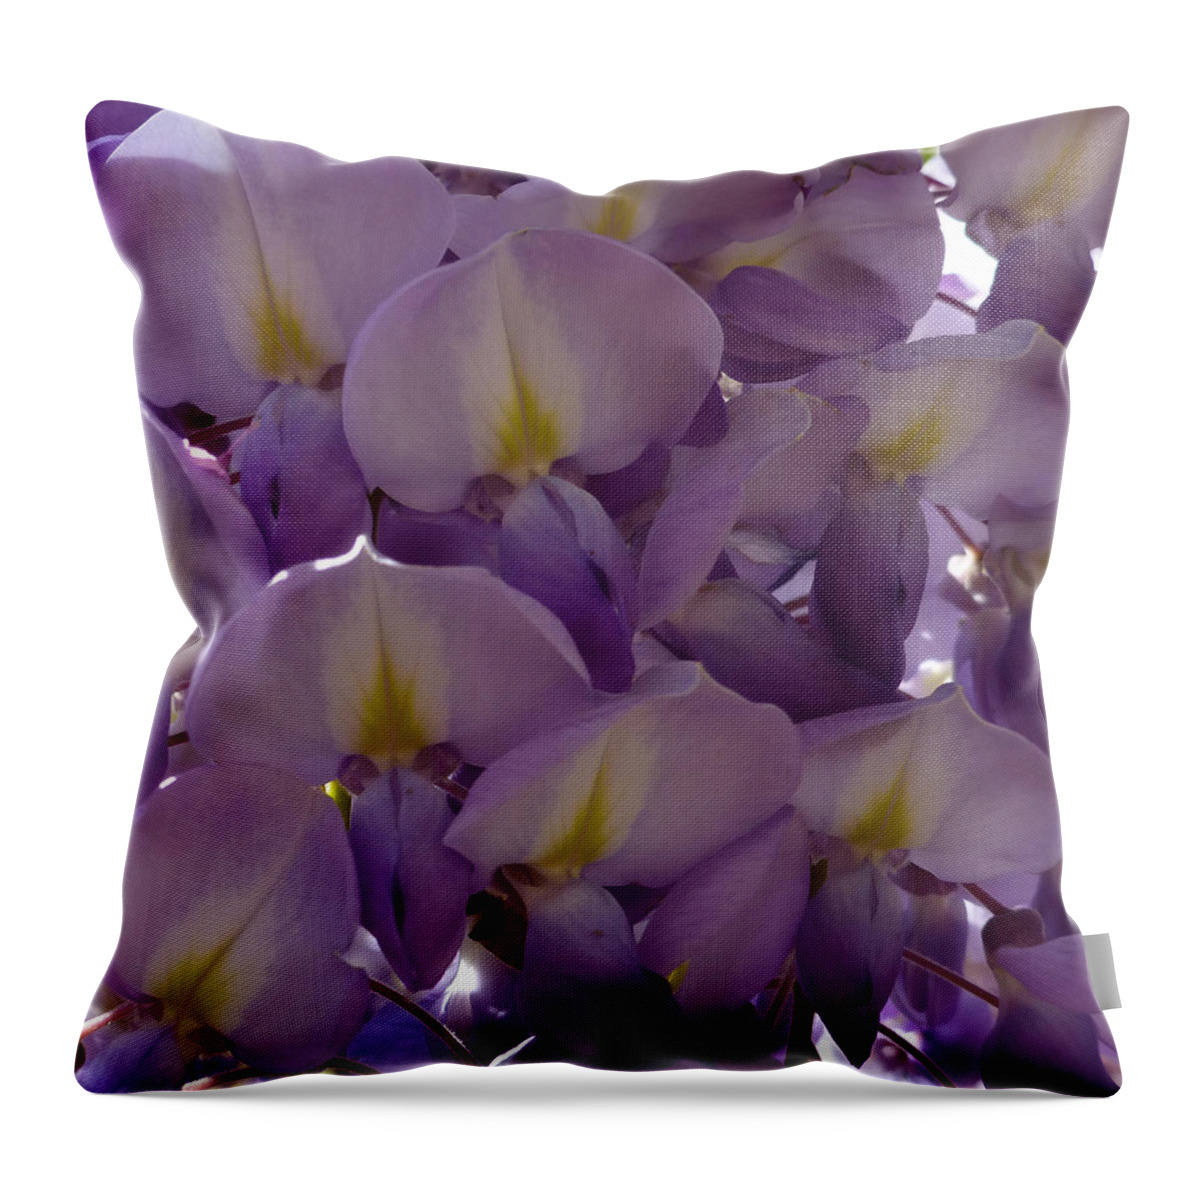 Purple Throw Pillow featuring the photograph Wisteria Hysteria by Claudia Goodell